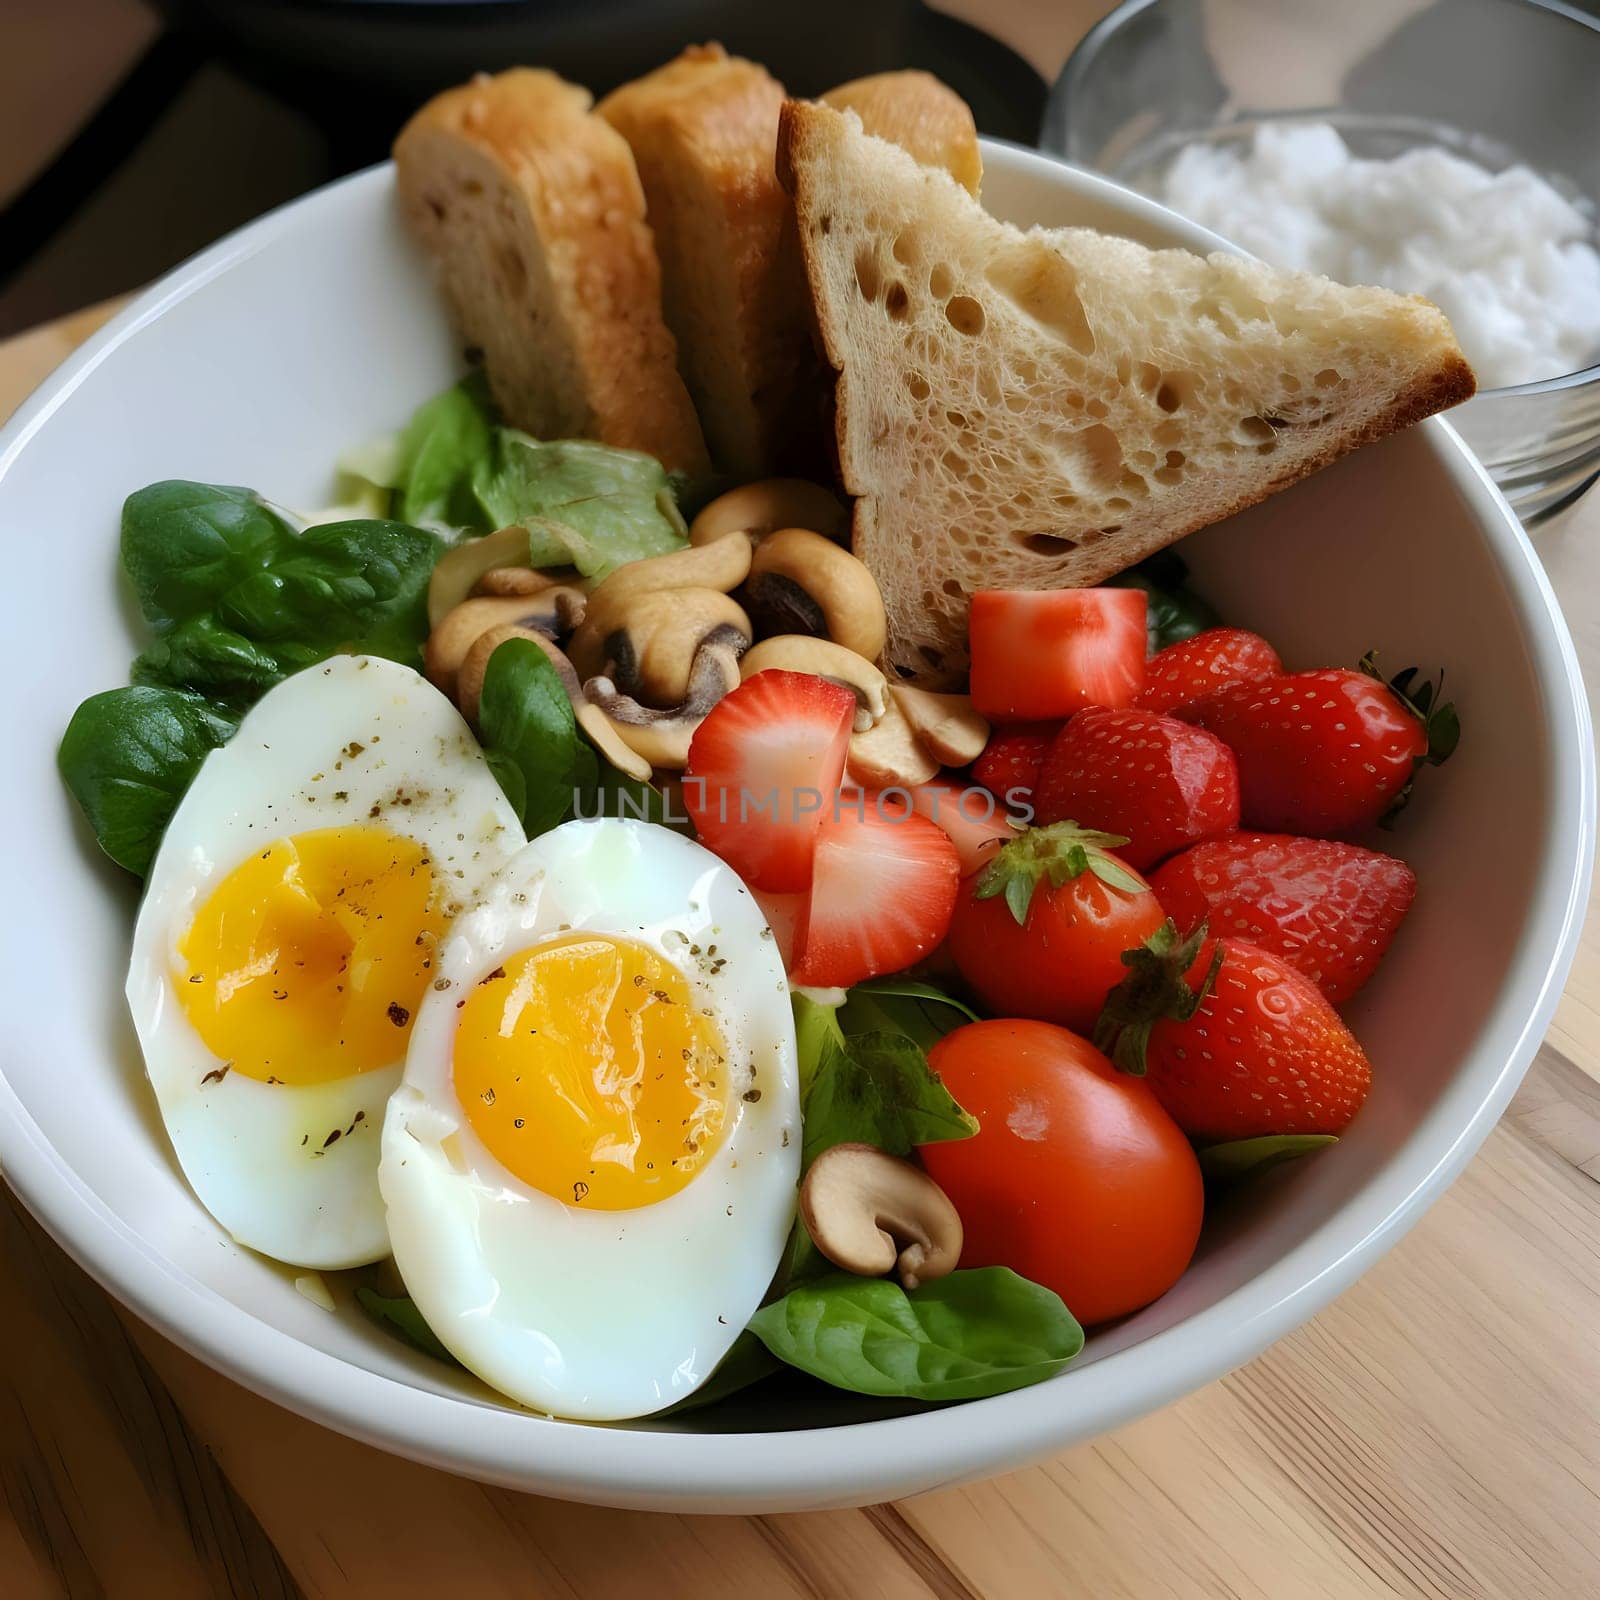 Egg, strawberries, tomato and bread in a bowl. by ThemesS